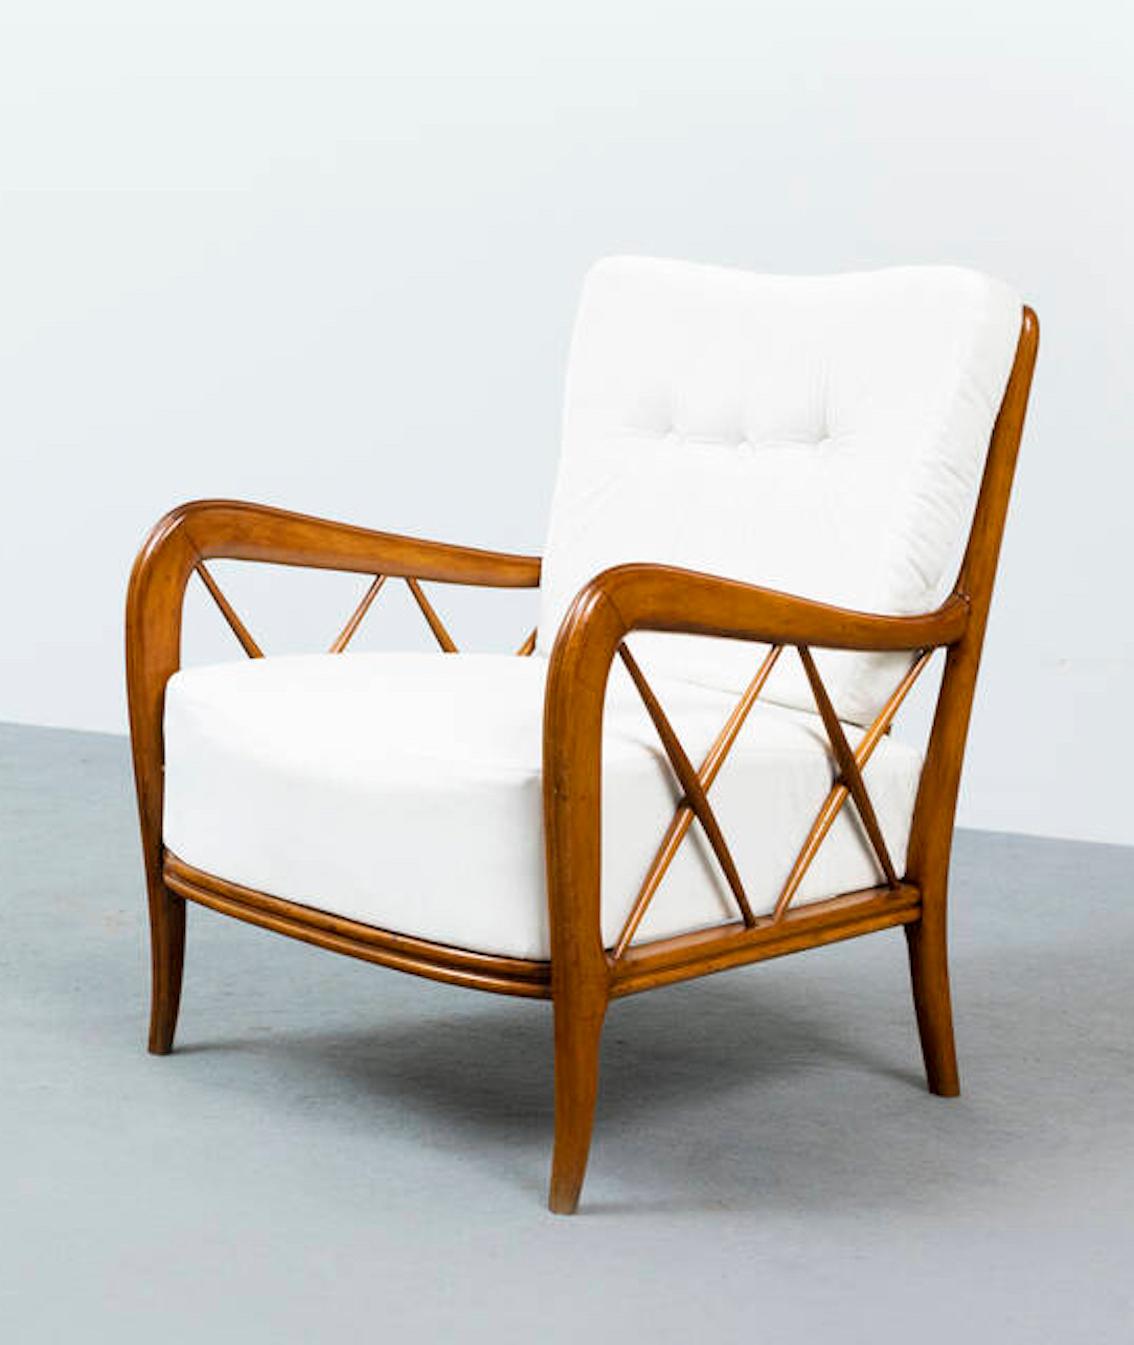 Pair of Mid-Century armchairs in the style of Paolo Buffa, Italy

This is a very elegant pair of 1950s Italian armchairs, polished solid wood structure and fabric cushions, an iconic and very refined shape that is well suited to different living